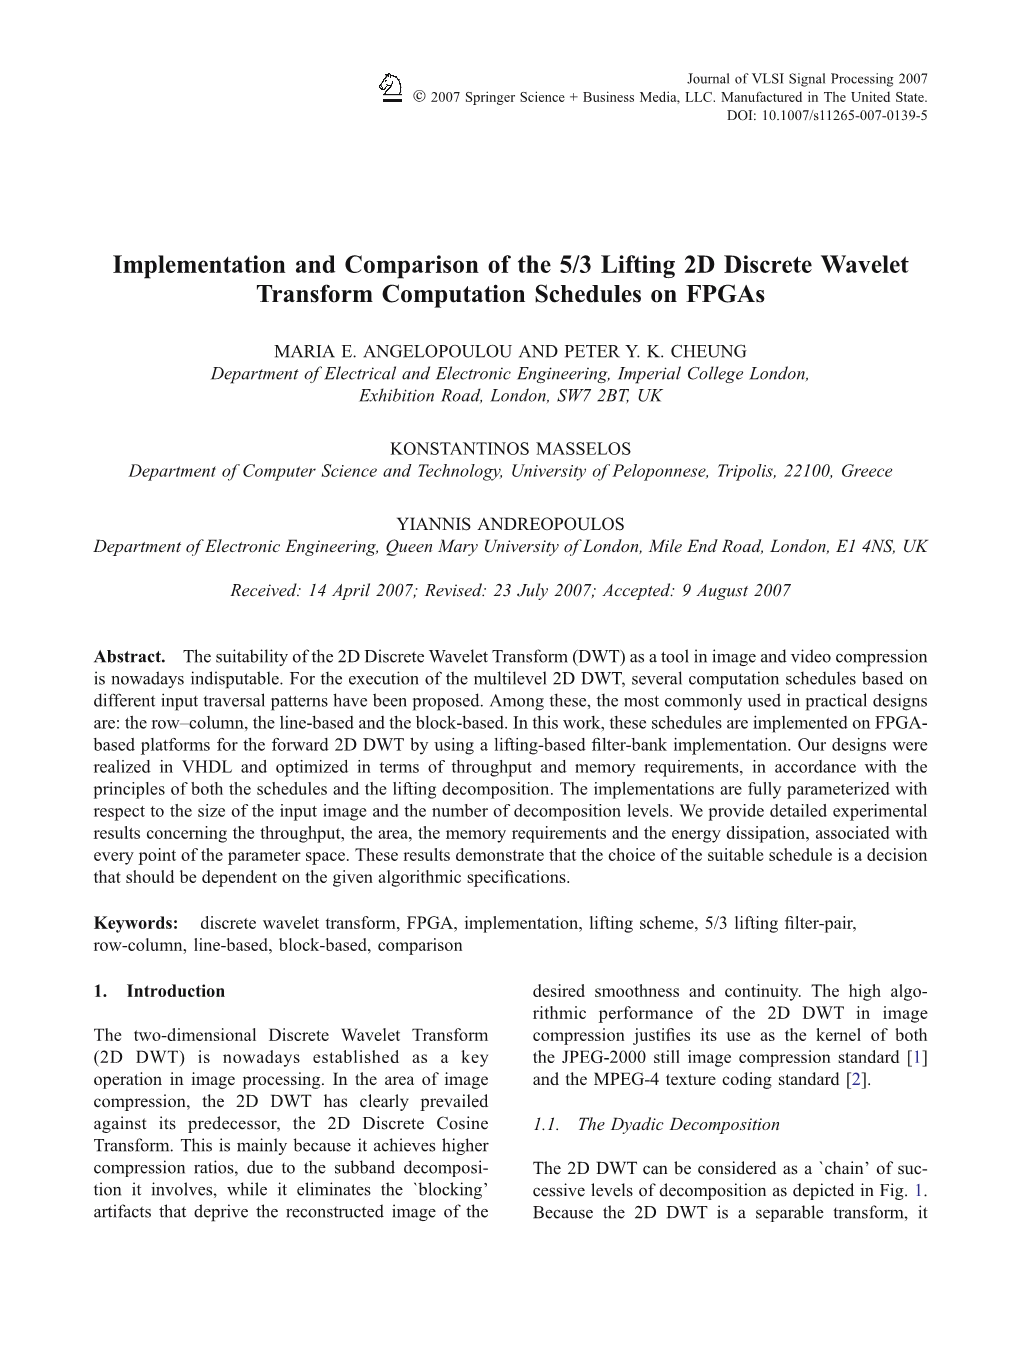 Implementation and Comparison of the 5/3 Lifting 2D Discrete Wavelet Transform Computation Schedules on Fpgas